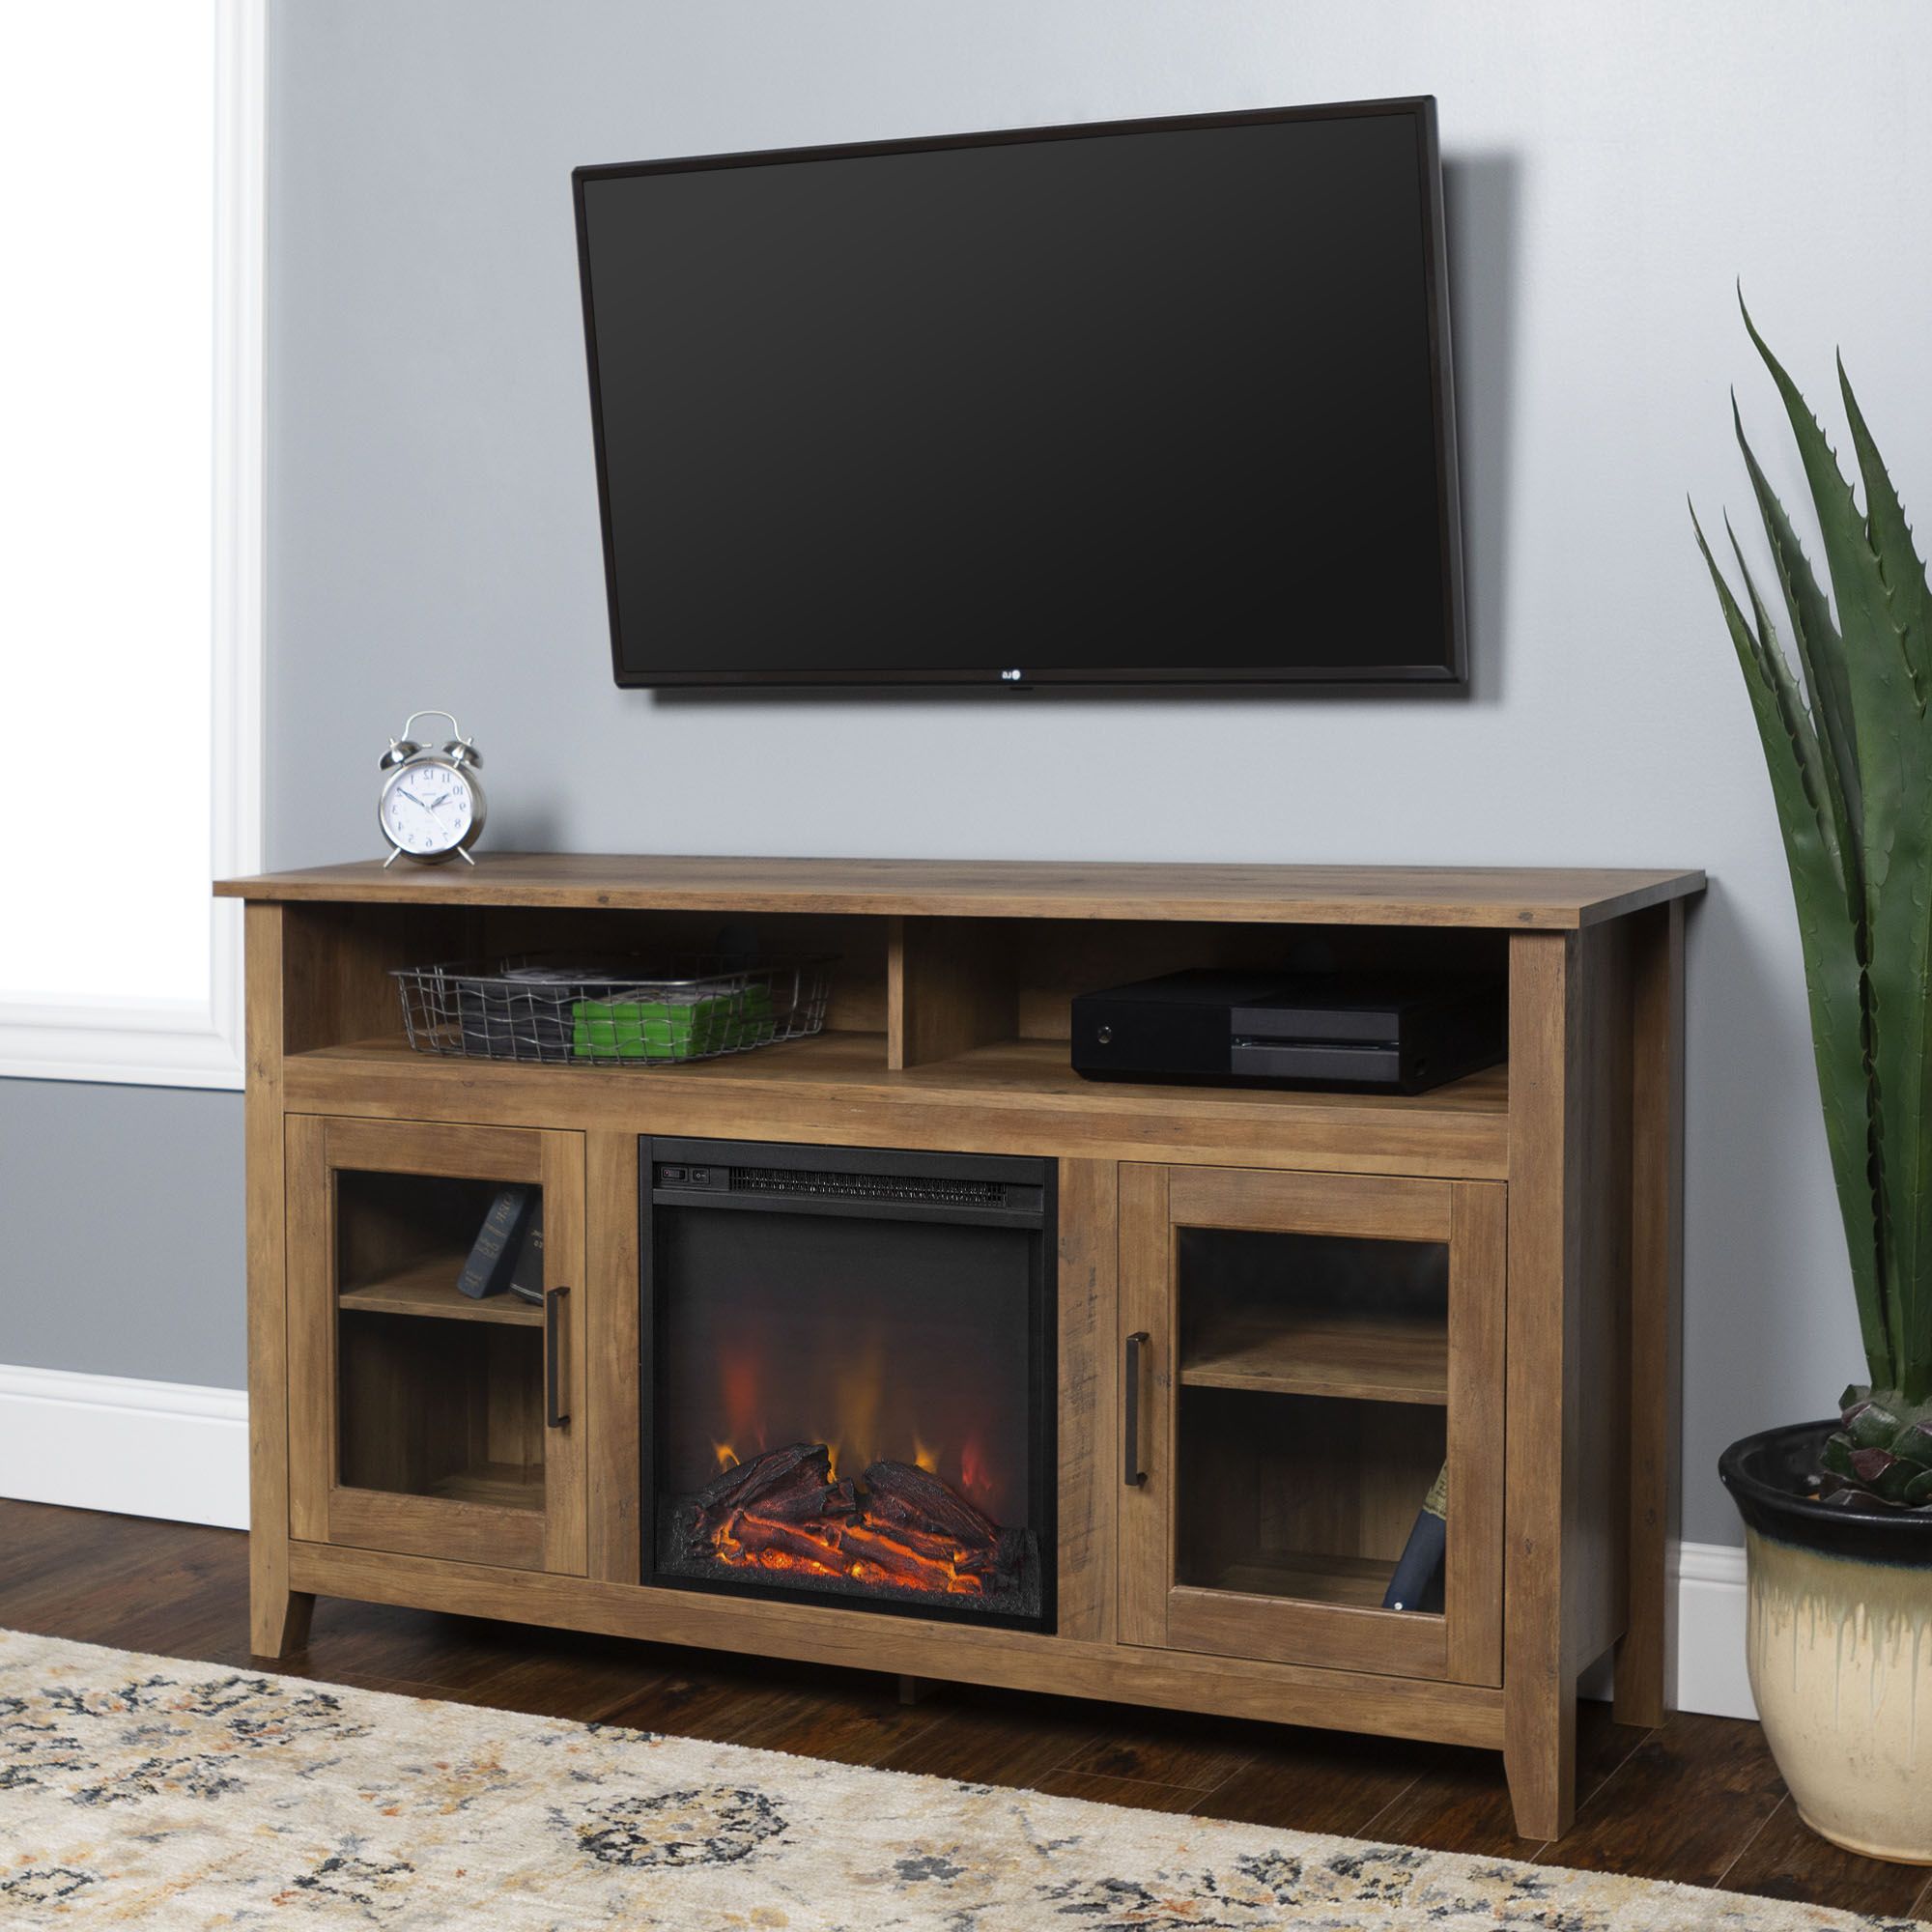 Widely Used Wood Highboy Fireplace Tv Stands Throughout 58" Wood Highboy Fireplace Tv Stand – Rustic Oak  (View 11 of 15)